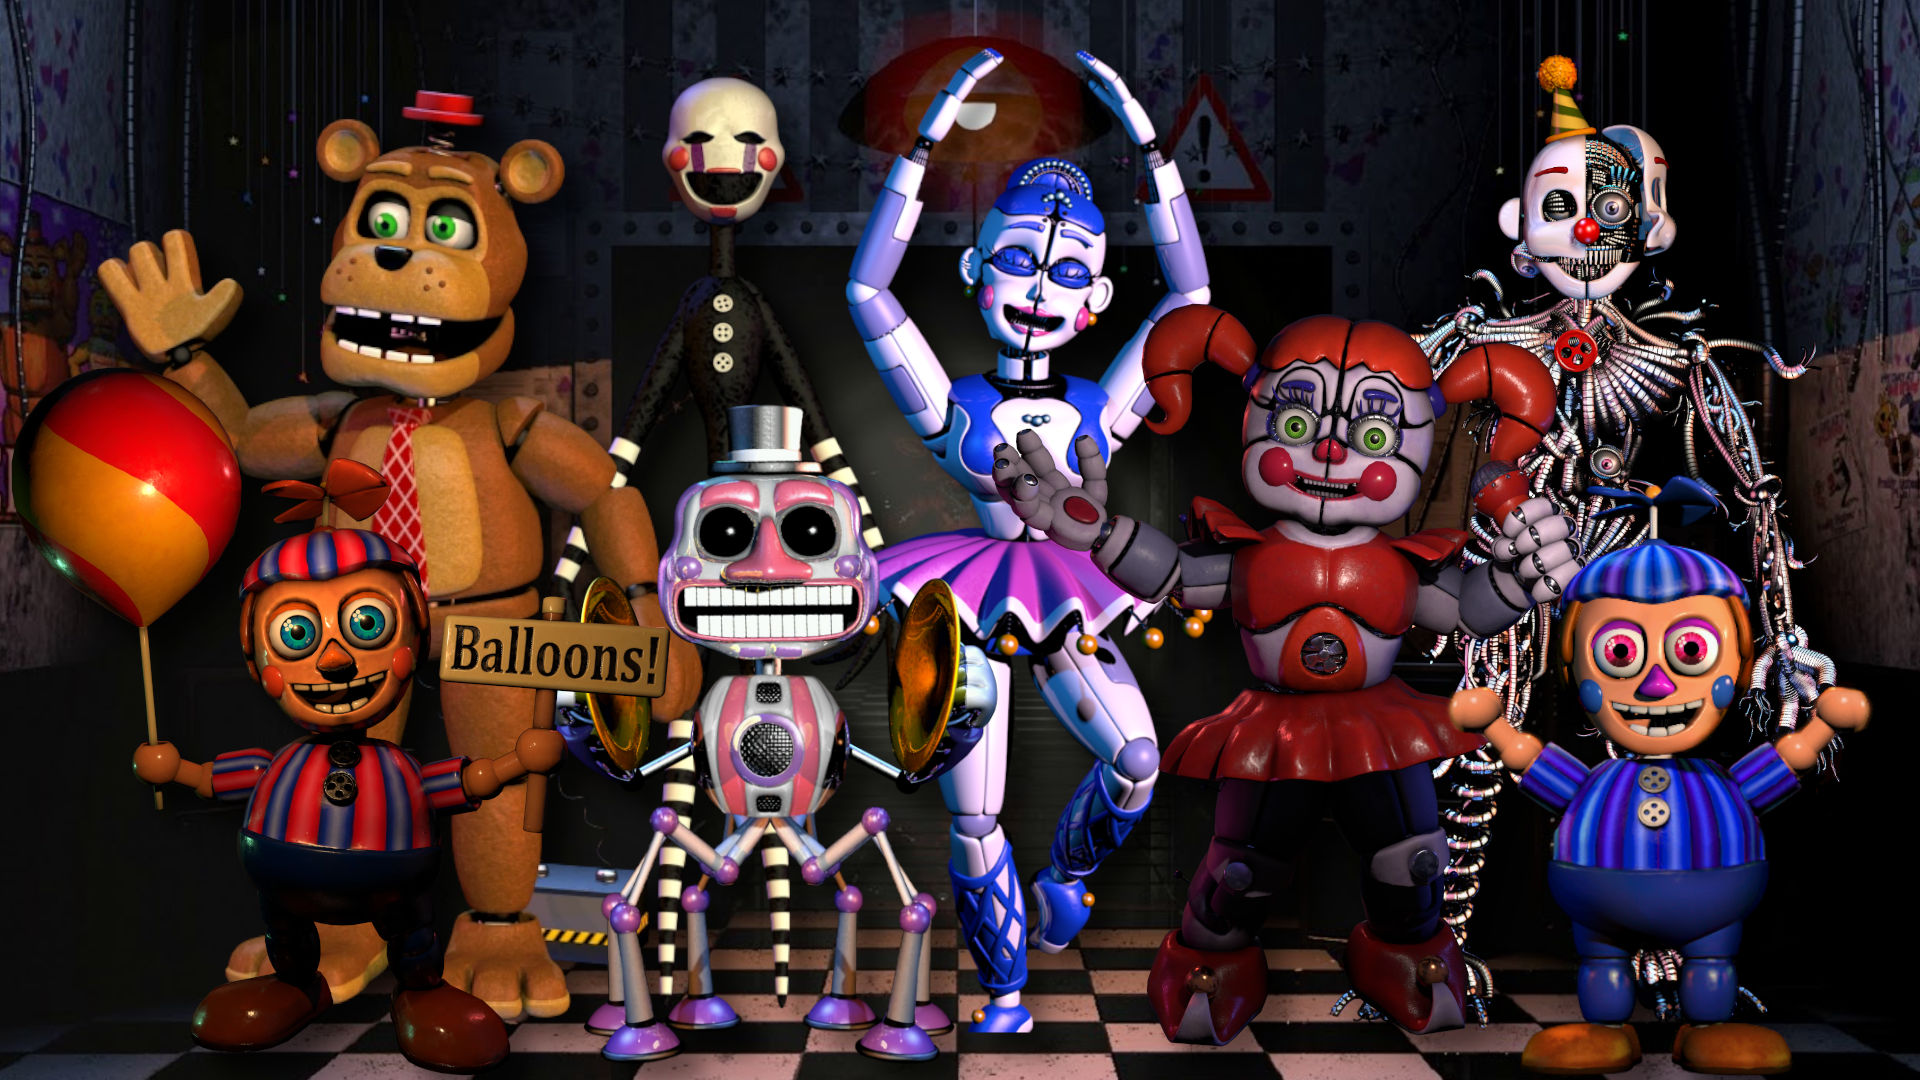 All Five Nights at Freddy Characters Techicy